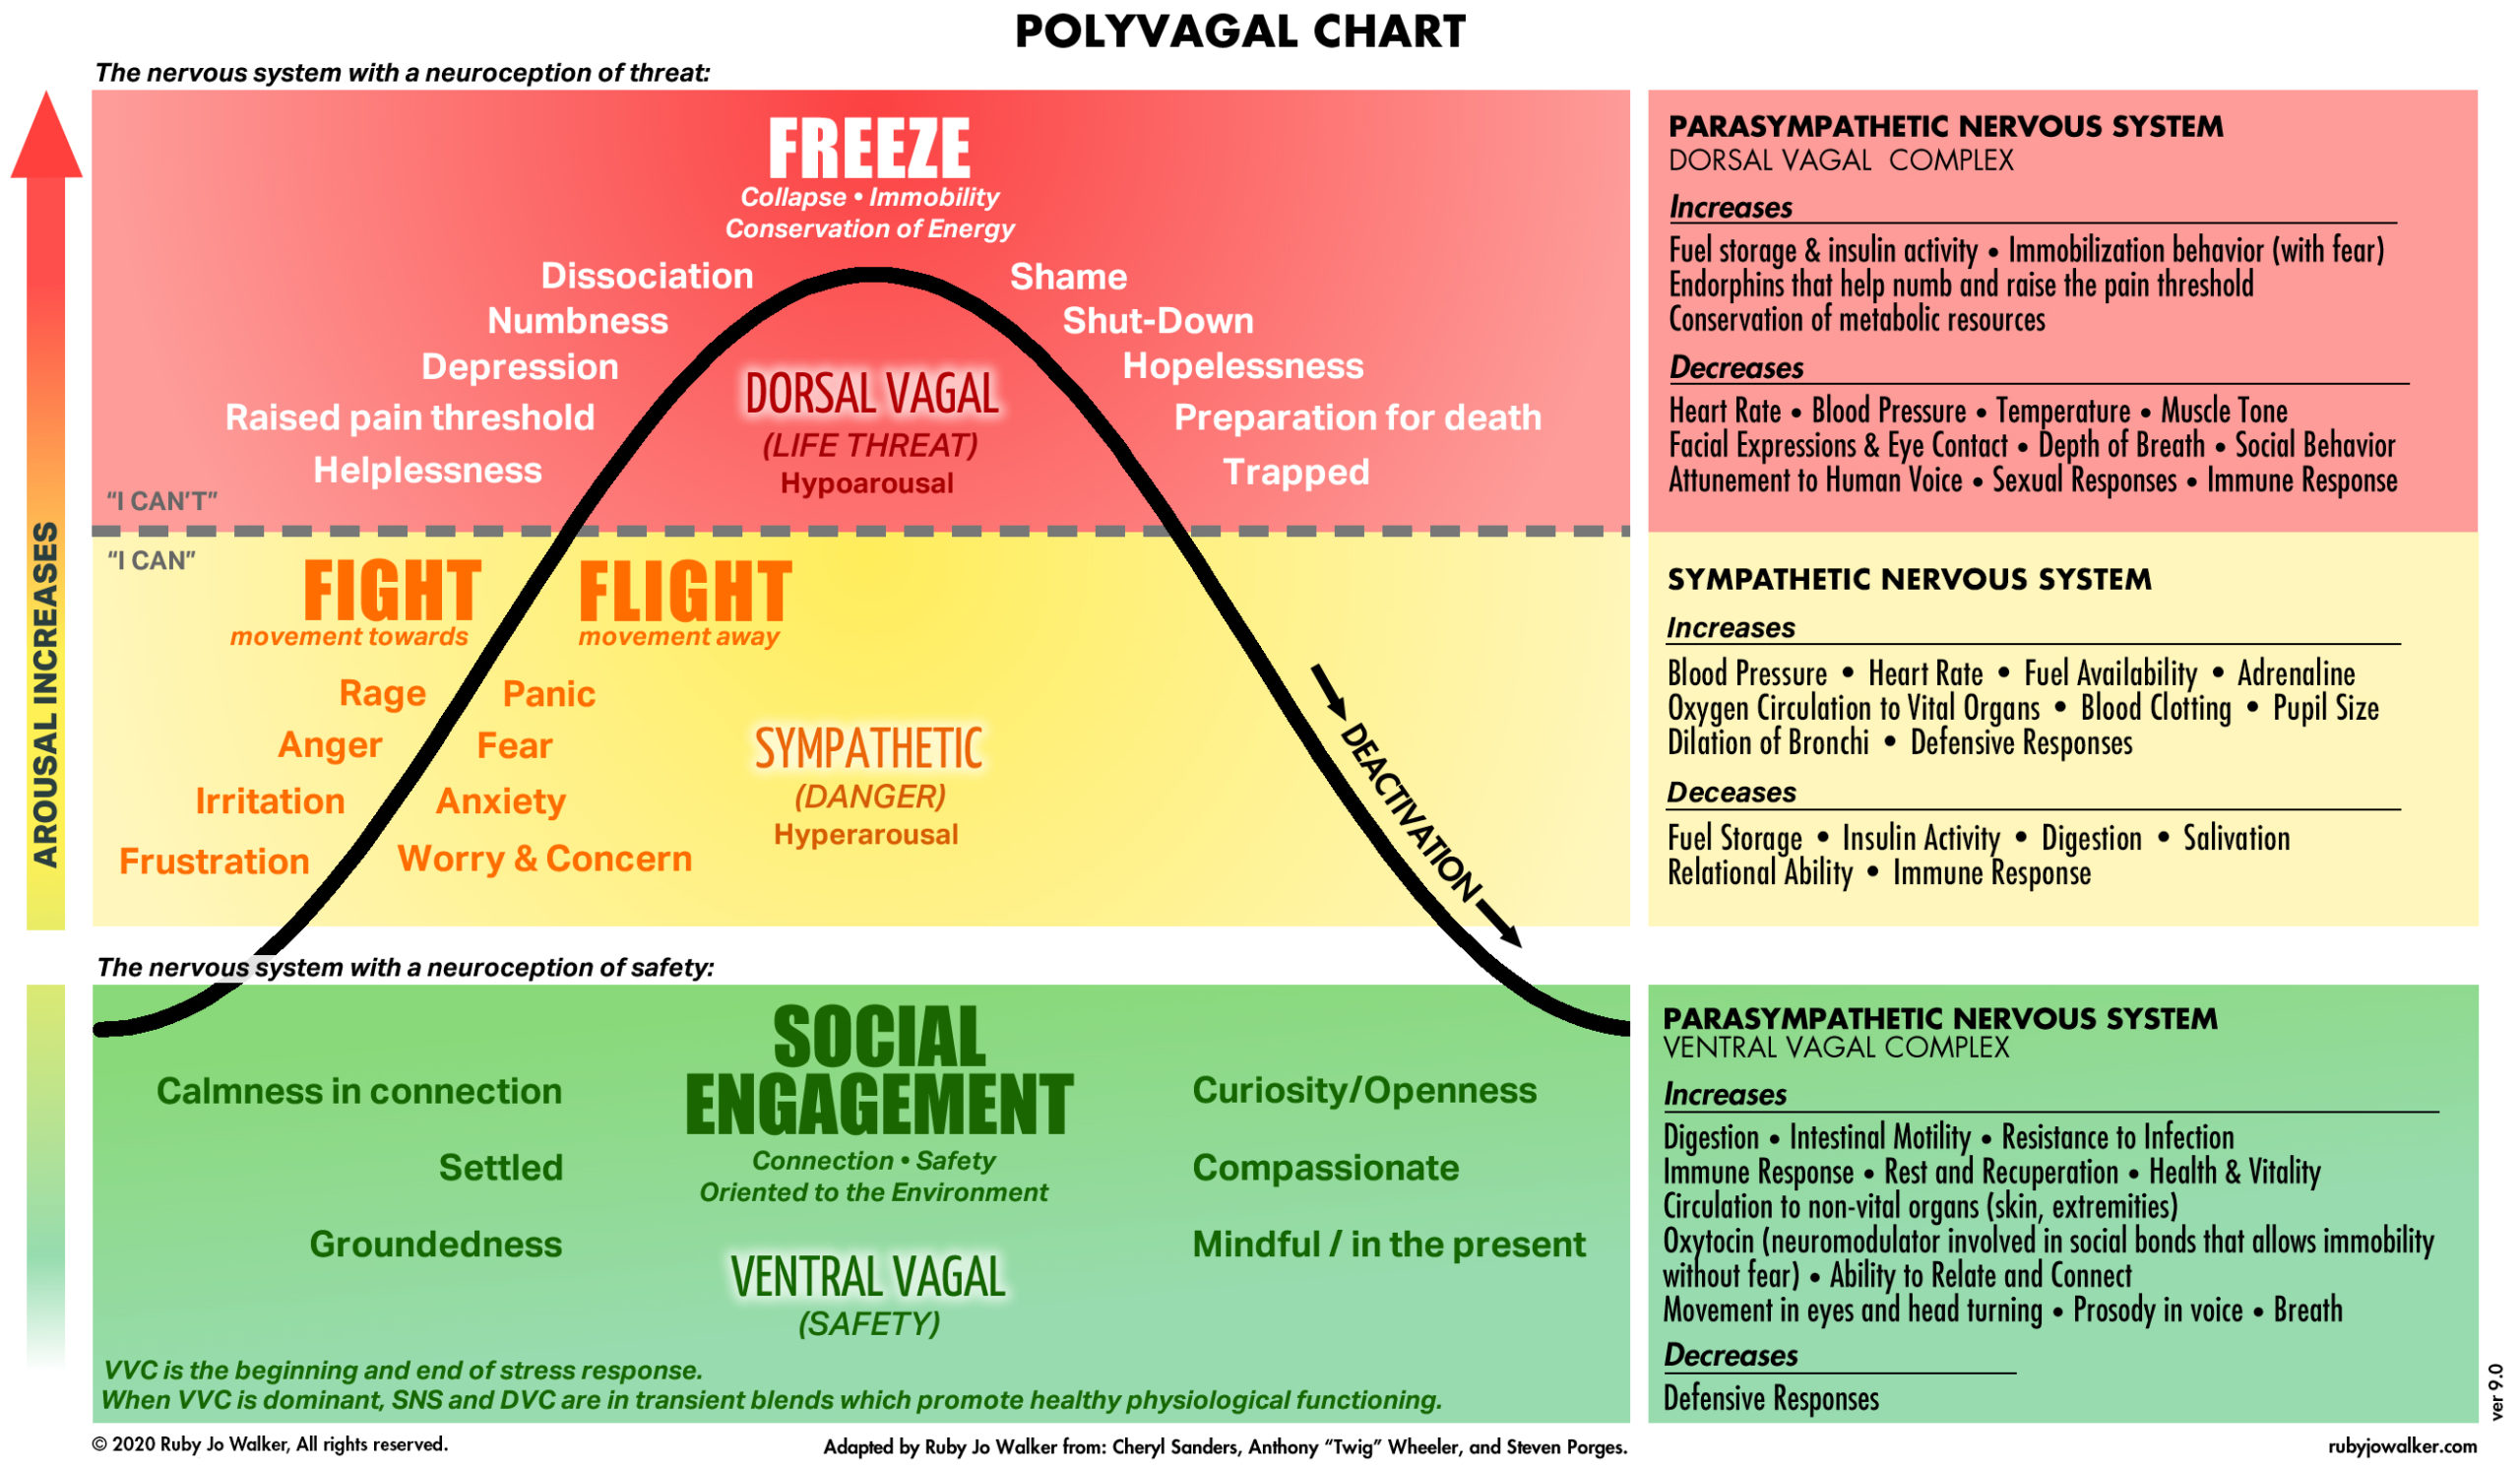 How to Map Your Own Nervous Sytem: The Polyvagal Theory